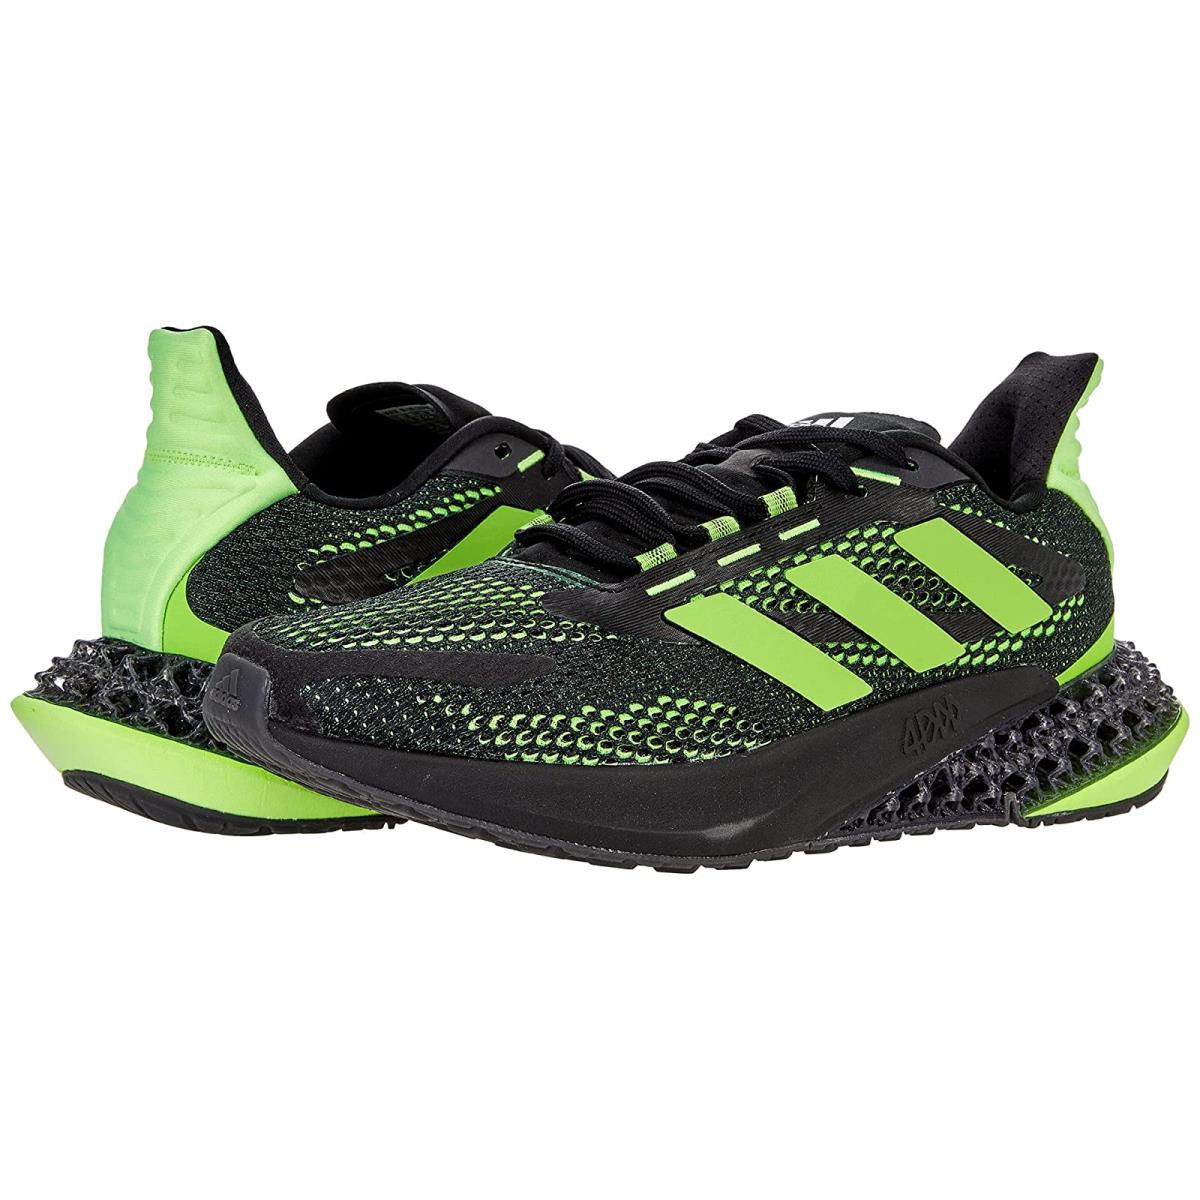 Man`s Sneakers Athletic Shoes Adidas Running 4DFWD Kick Black/Signal Green/Carbon